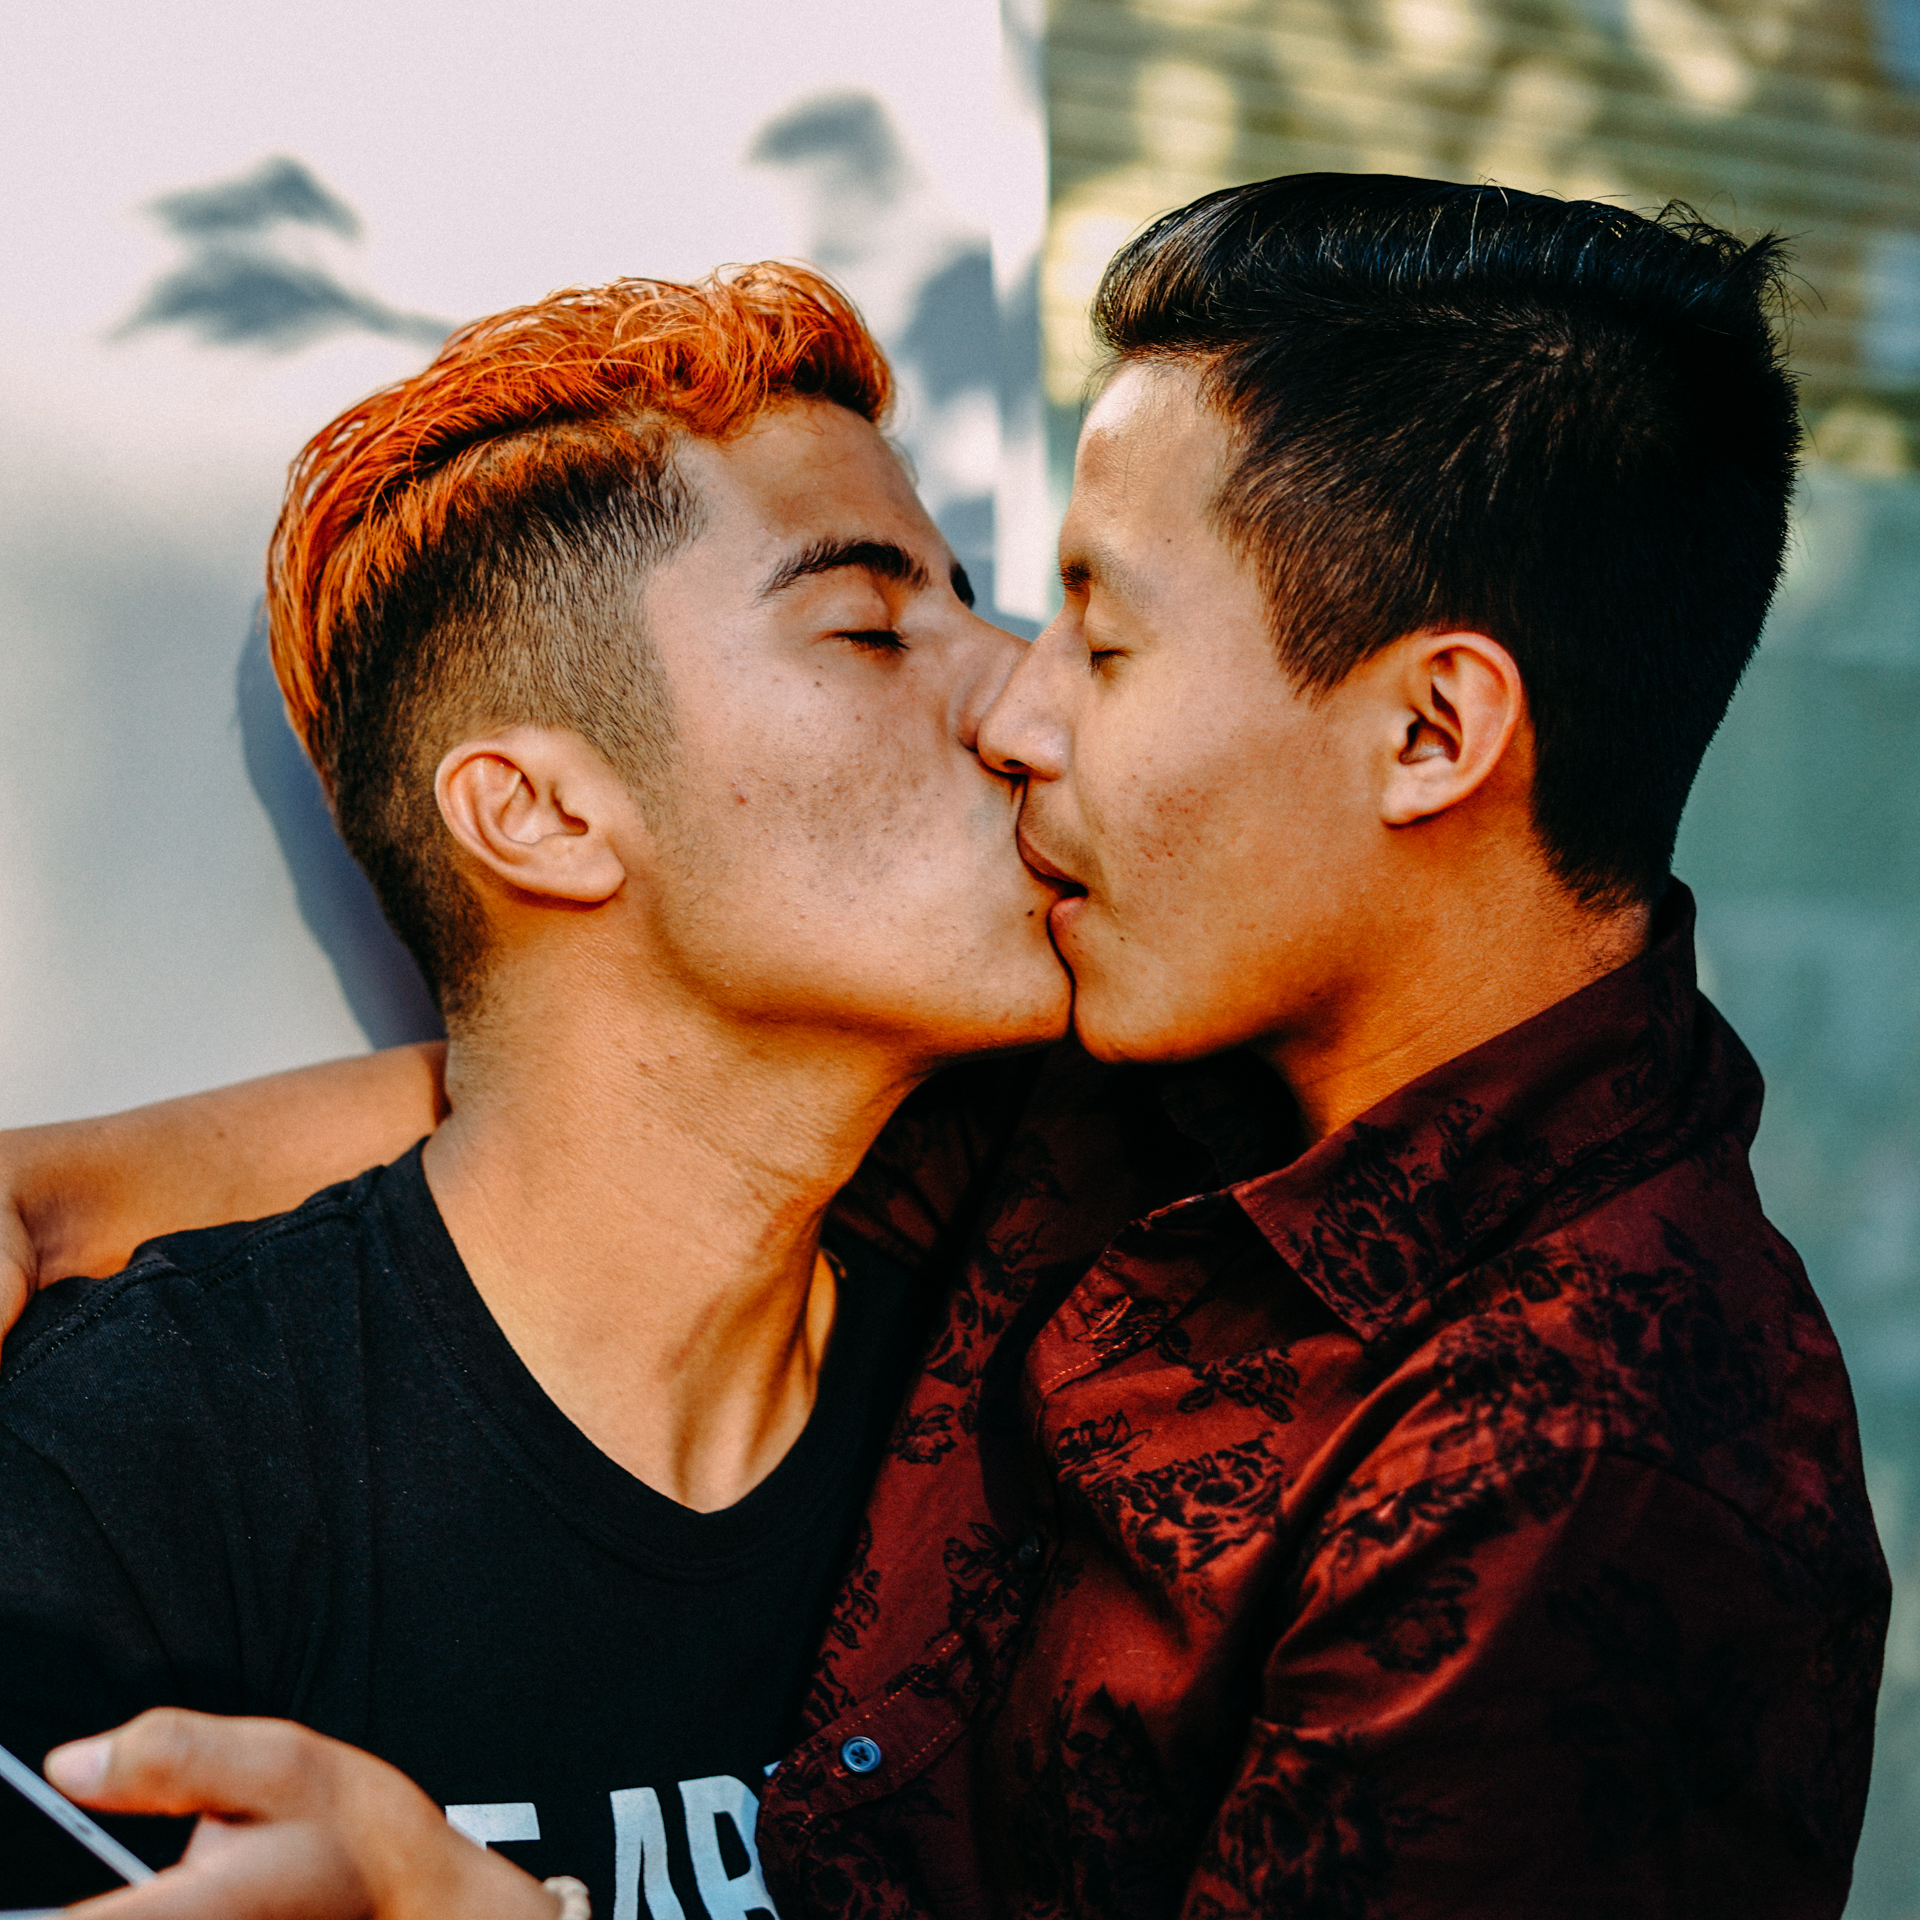  Two young men shares a kiss at the second annual ‘Latinx Pride Day’ on July 14th 2018 in Seattle, Wash.  